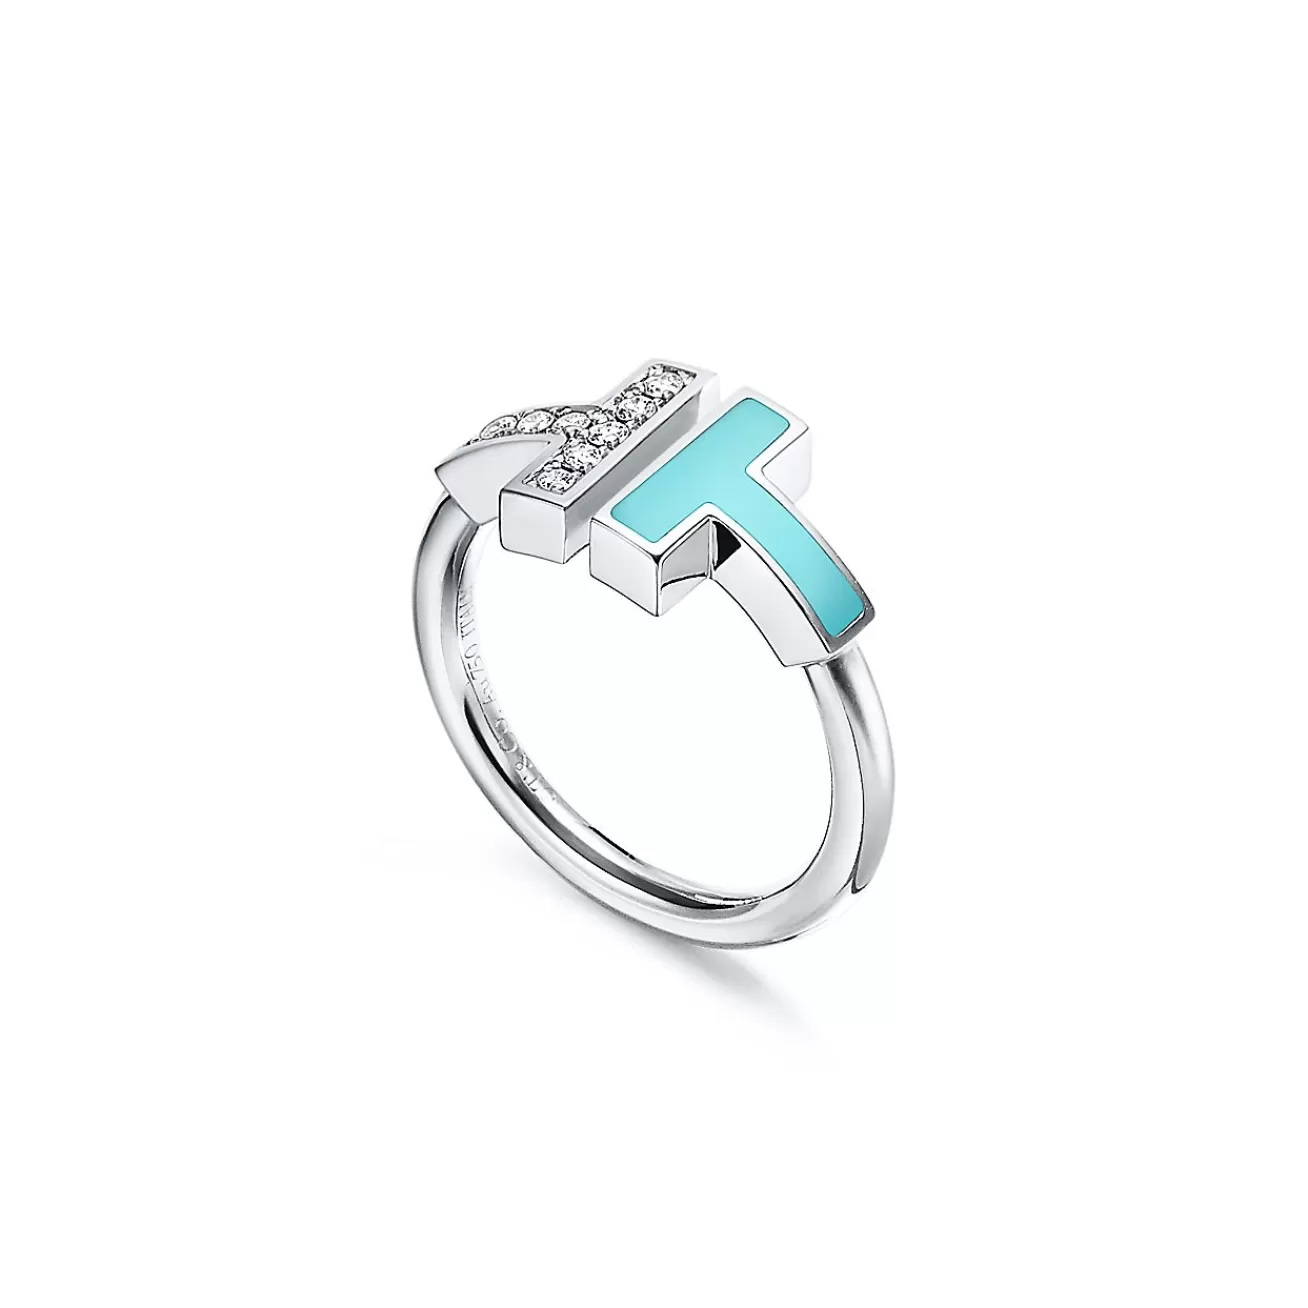 Tiffany & Co. Tiffany T diamond and turquoise wire ring in 18k white gold. | ^ Rings | Gifts for Her